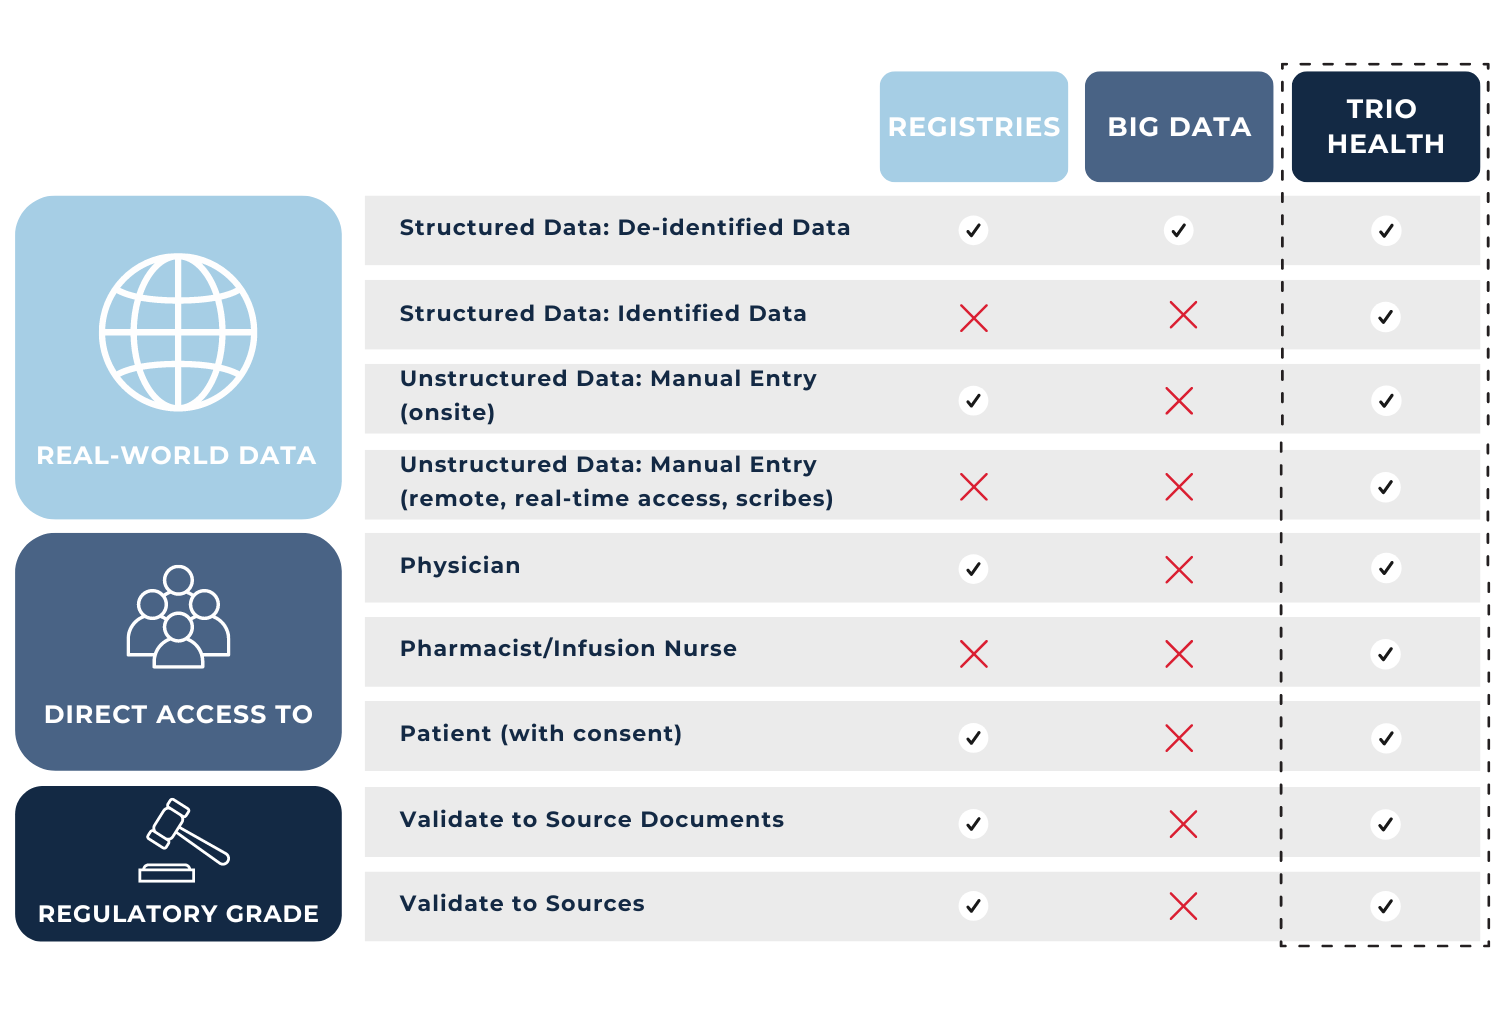 comparison chart displaying the capabilities of trio health compared to big data providers and patient registries, including regulatory grade data and access to all patient care stakeholders